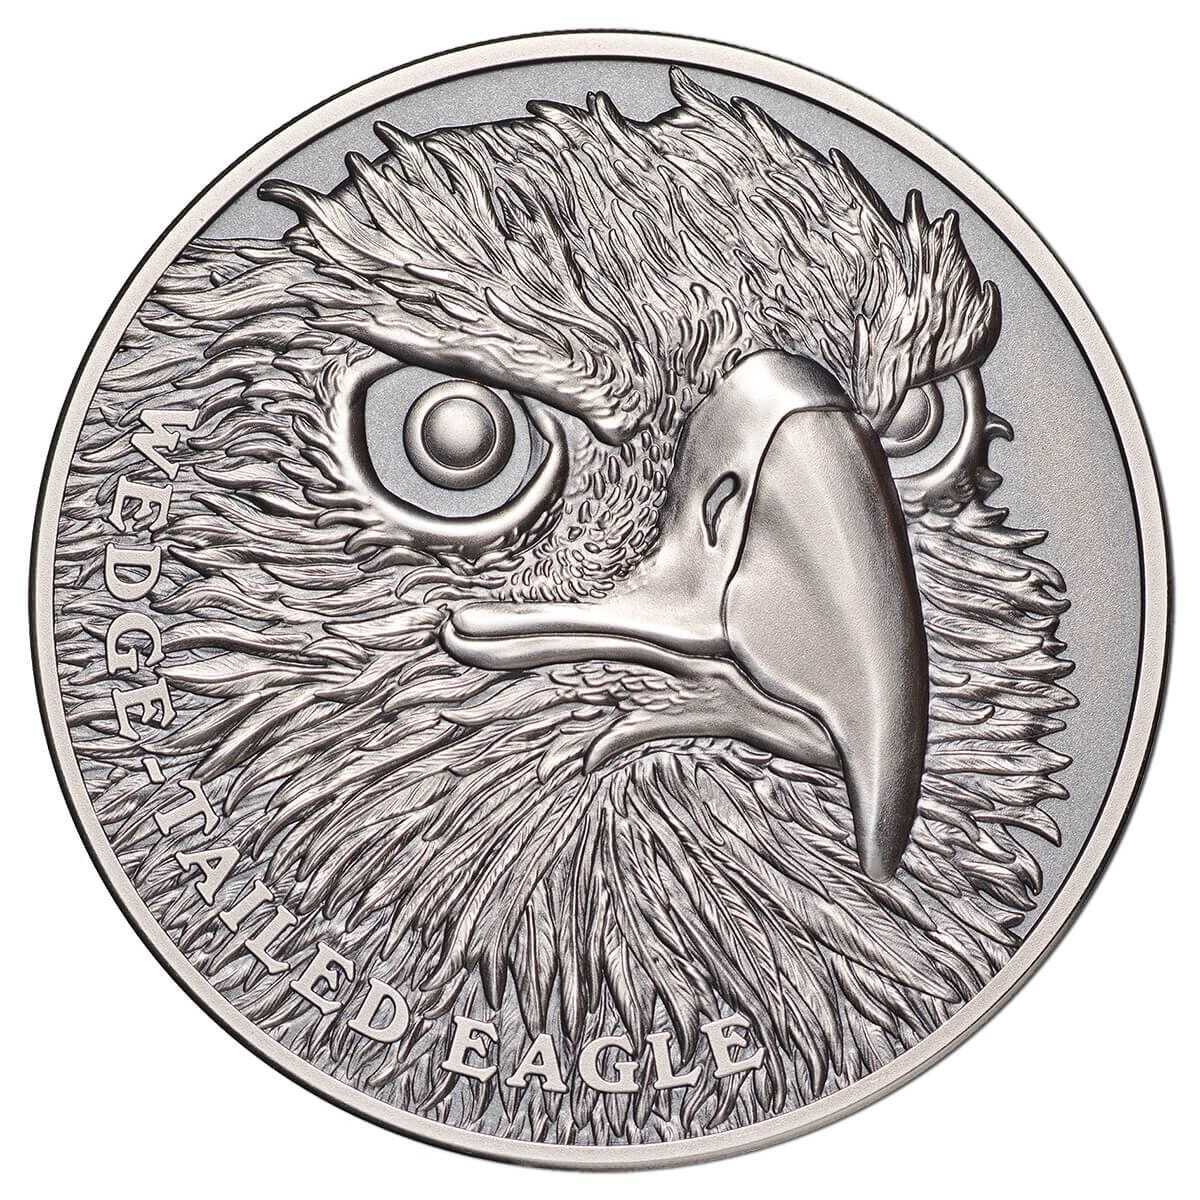 2020 $1 Wedge-Tailed Eagle 1oz Silver Proof High Relief Coin